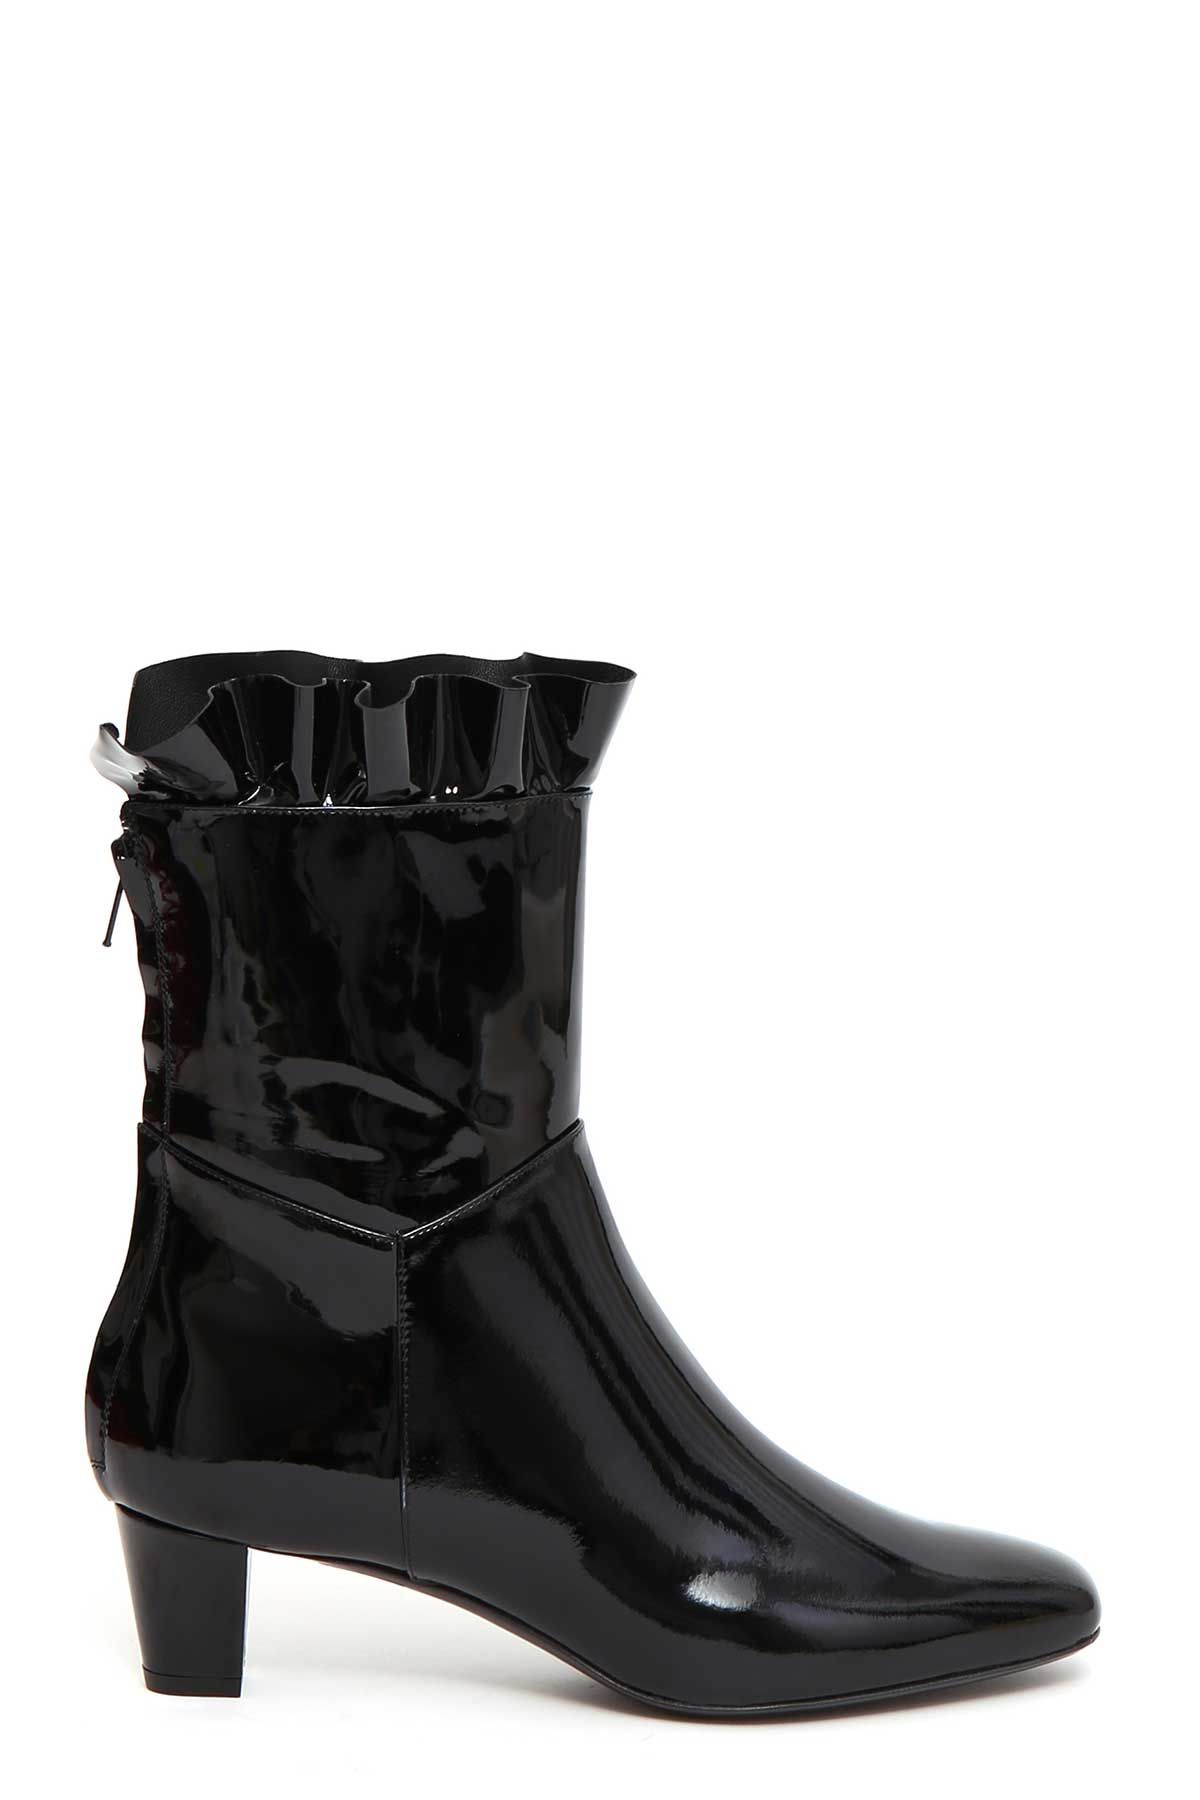 Philosophy Di Lorenzo Serafini Patent Leather Bootie With Frill, $595.5